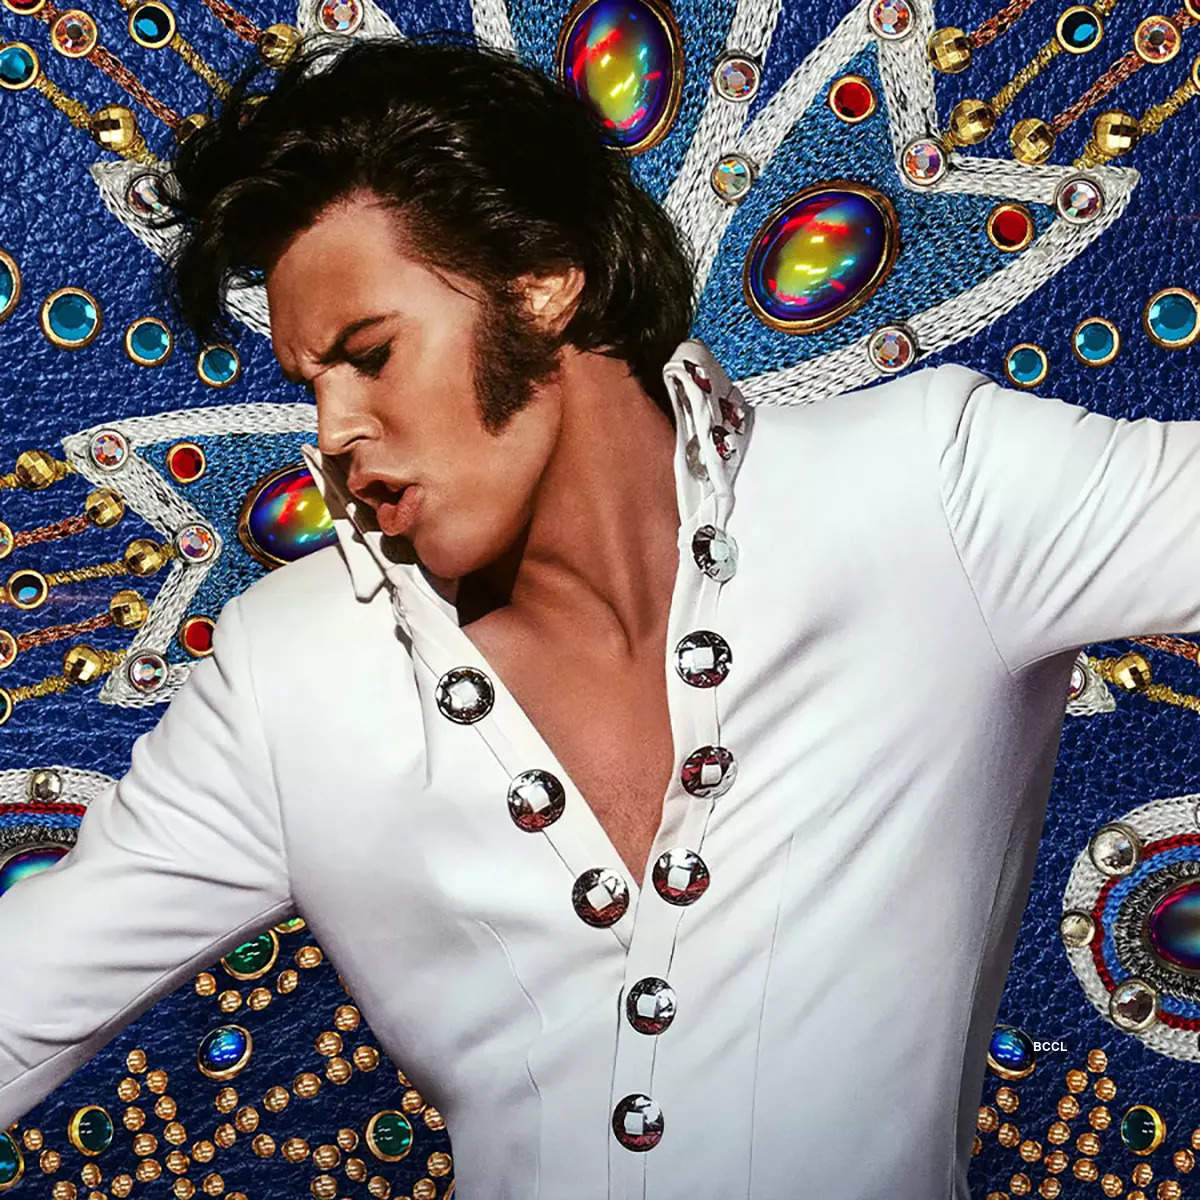 Baz Luhrmann's 'Elvis', based on the greatest rock ‘n’ roll star of all time receives mixed reviews